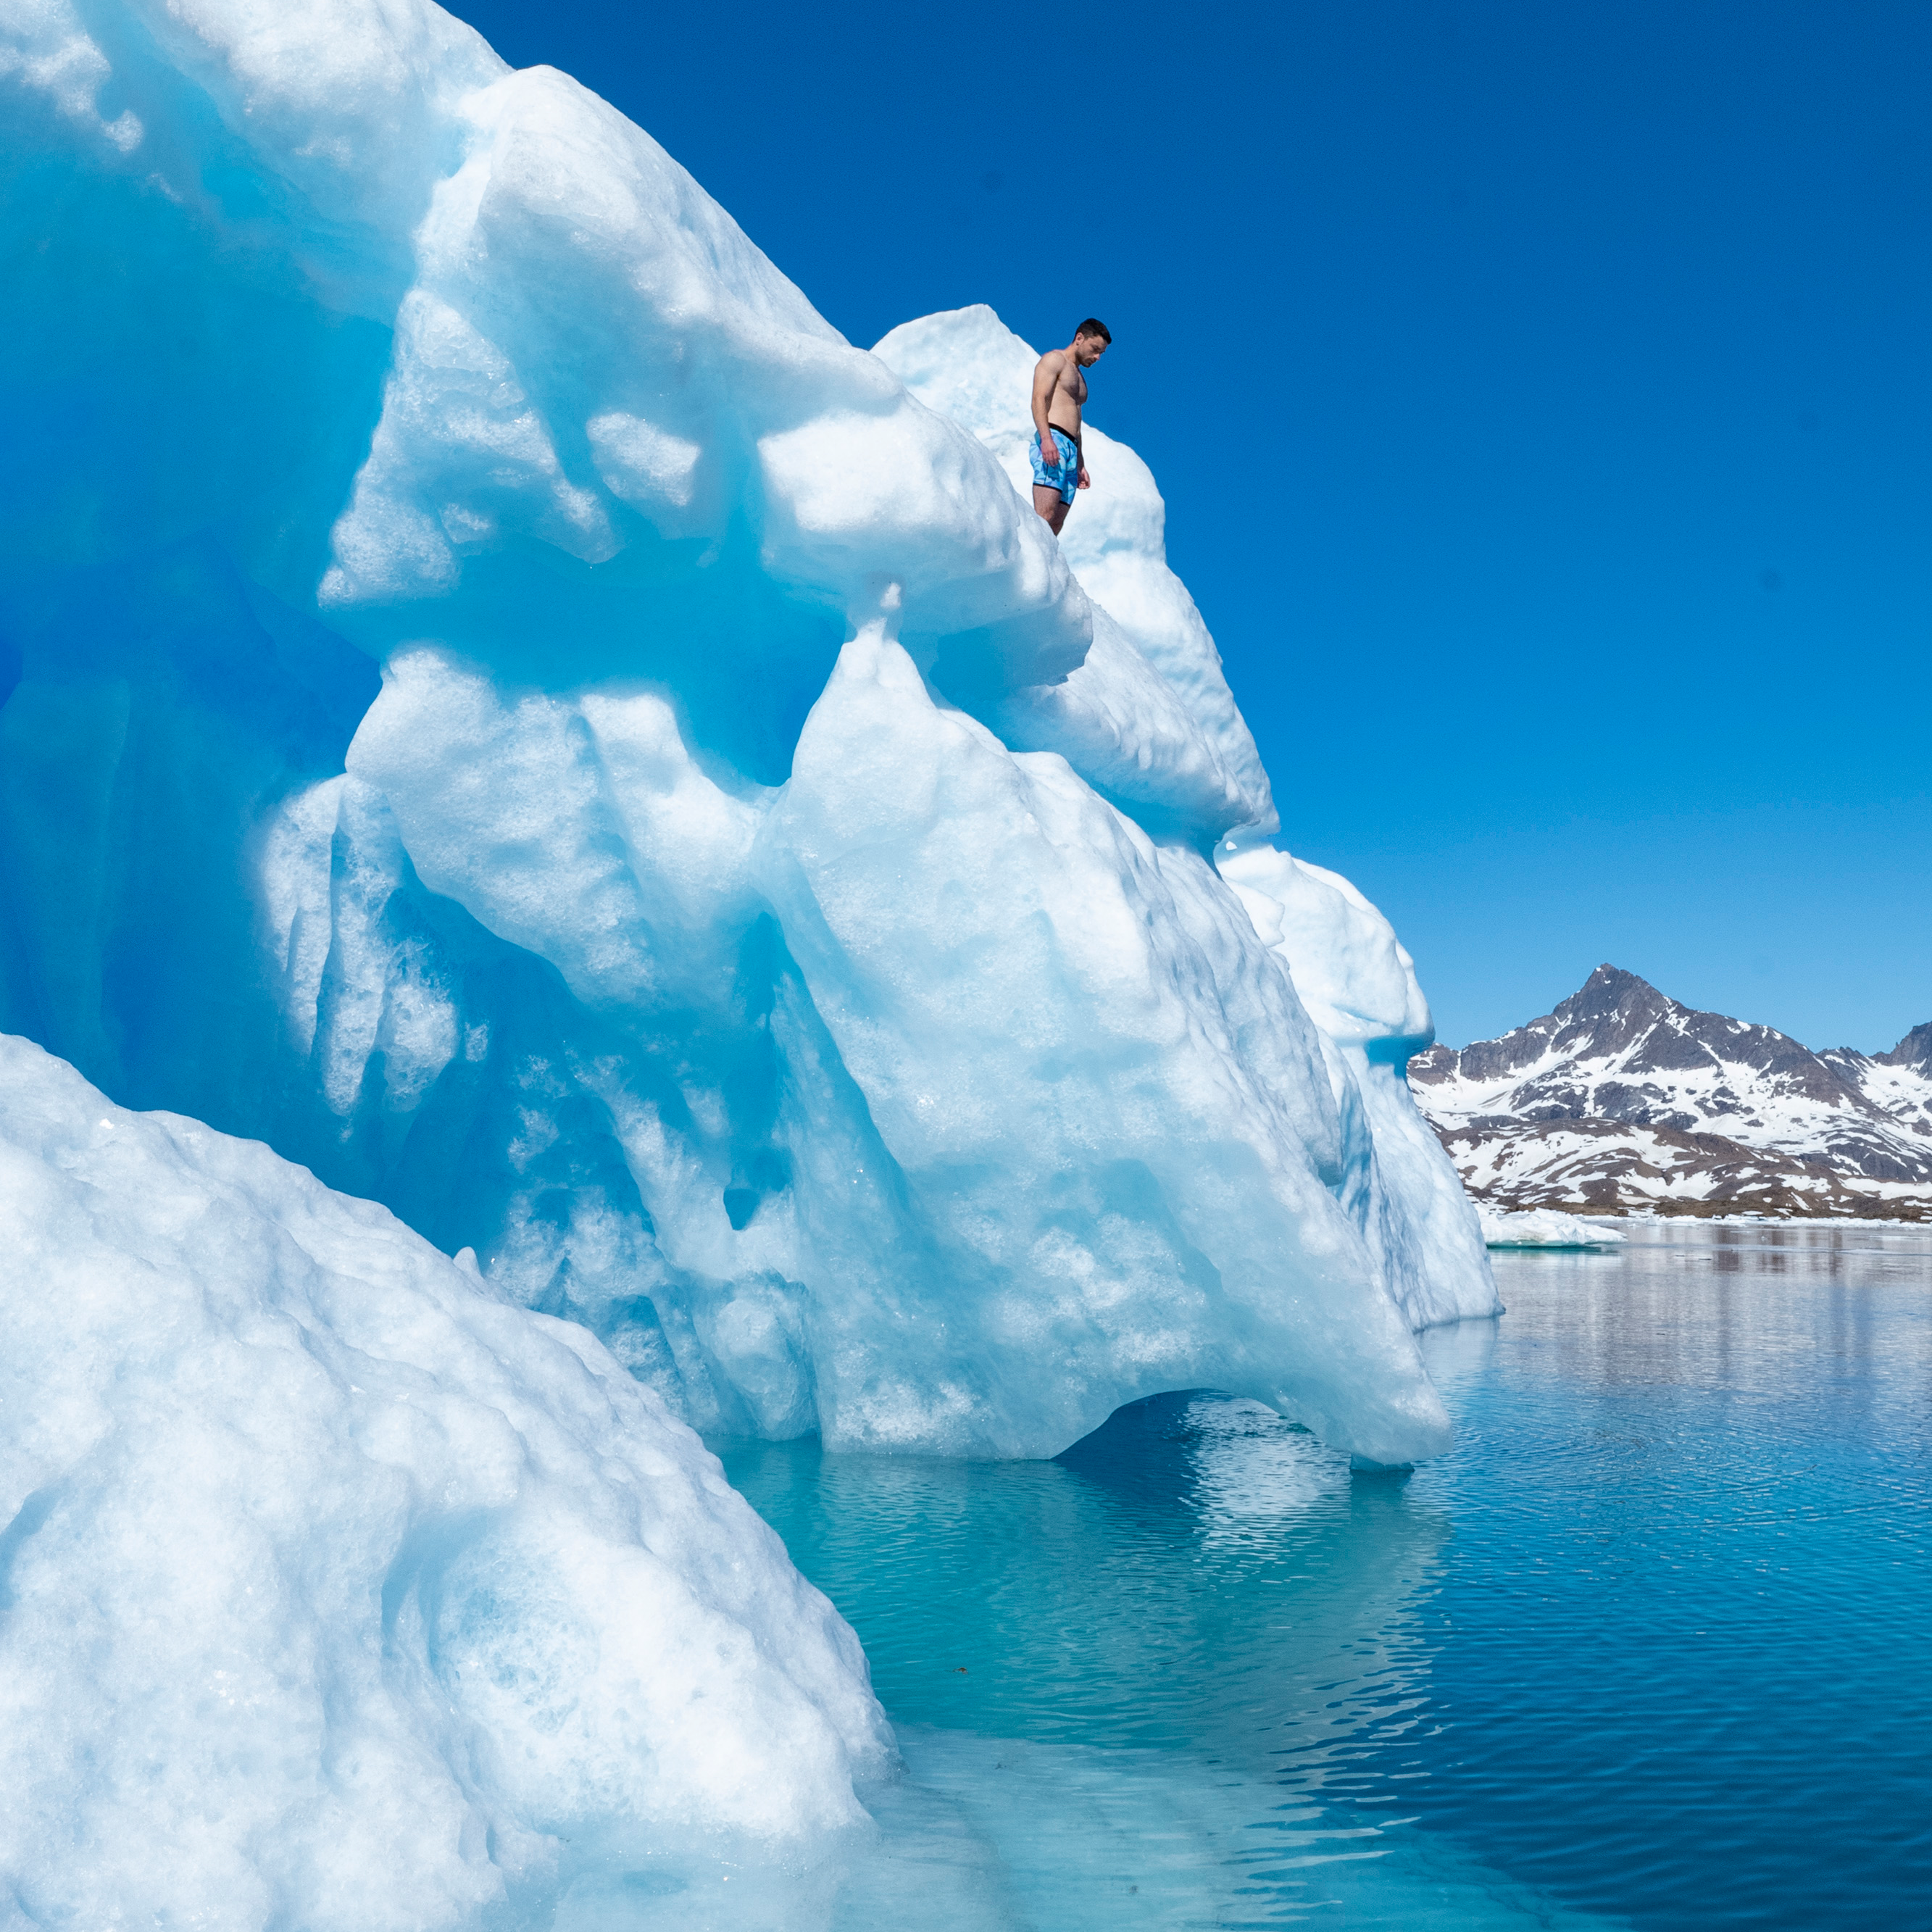 Luke Adams standing barefoot atop this glacier in Greenland